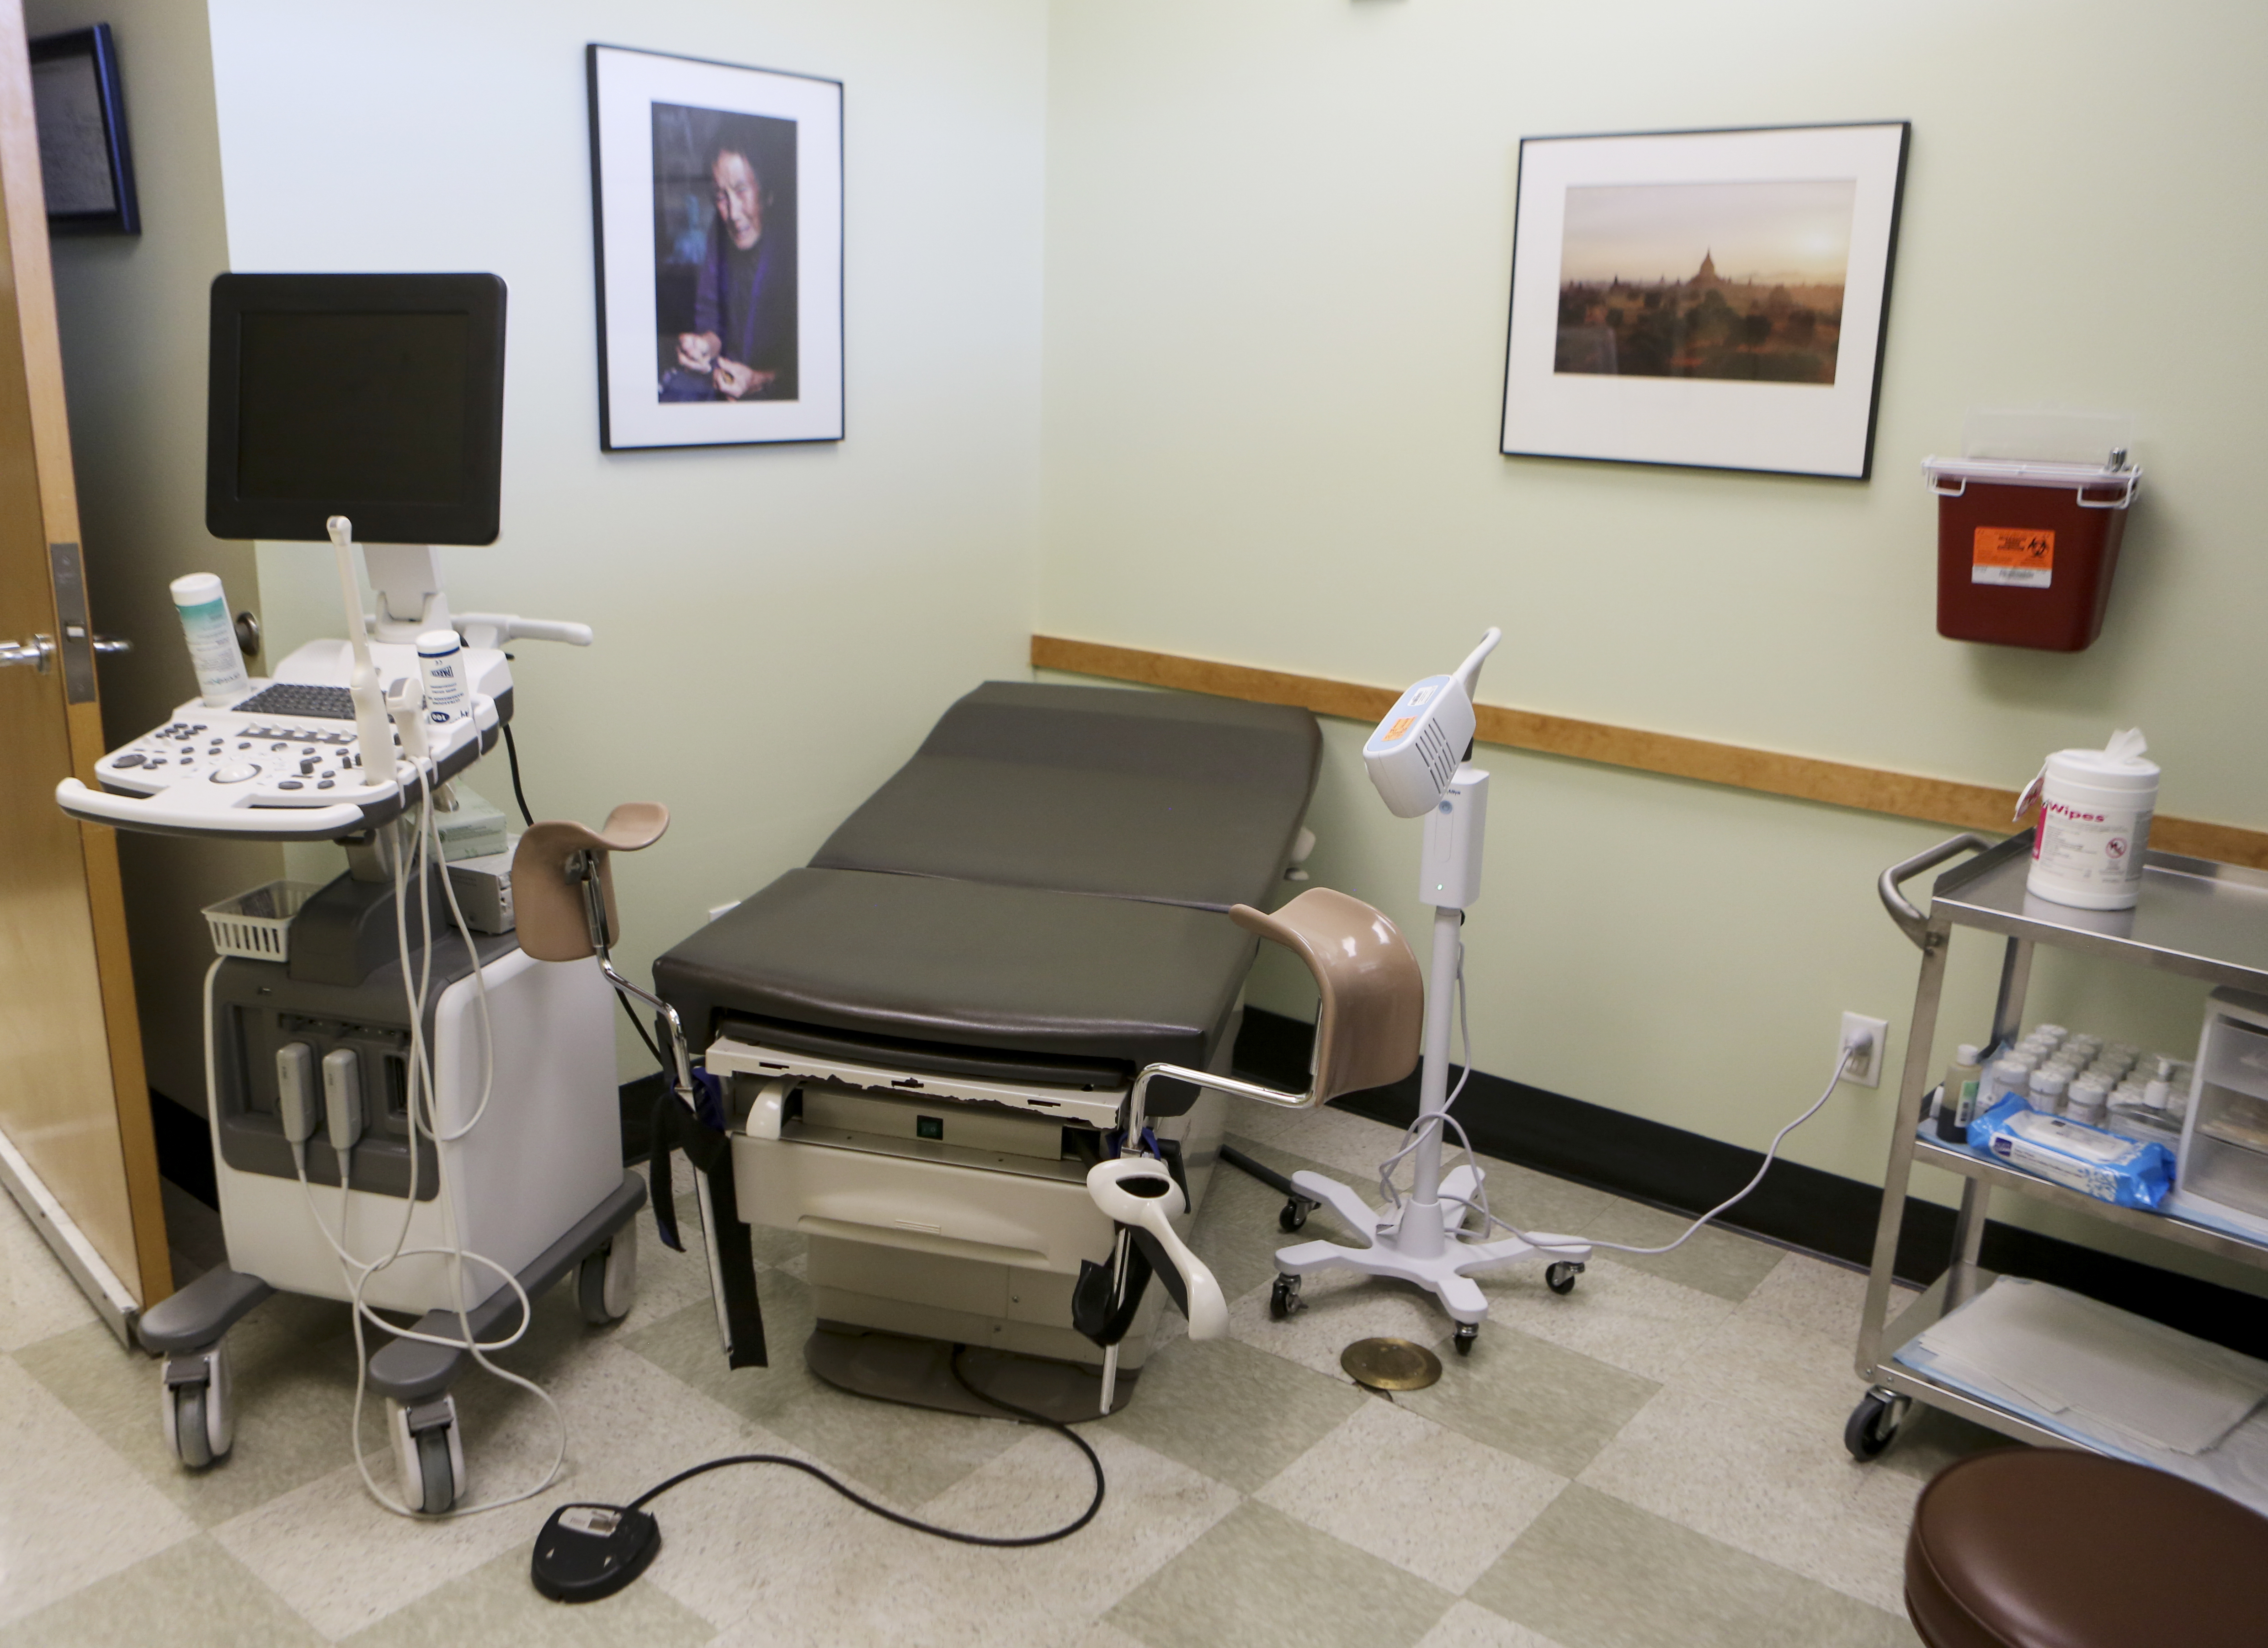 An exam room at the Planned Parenthood